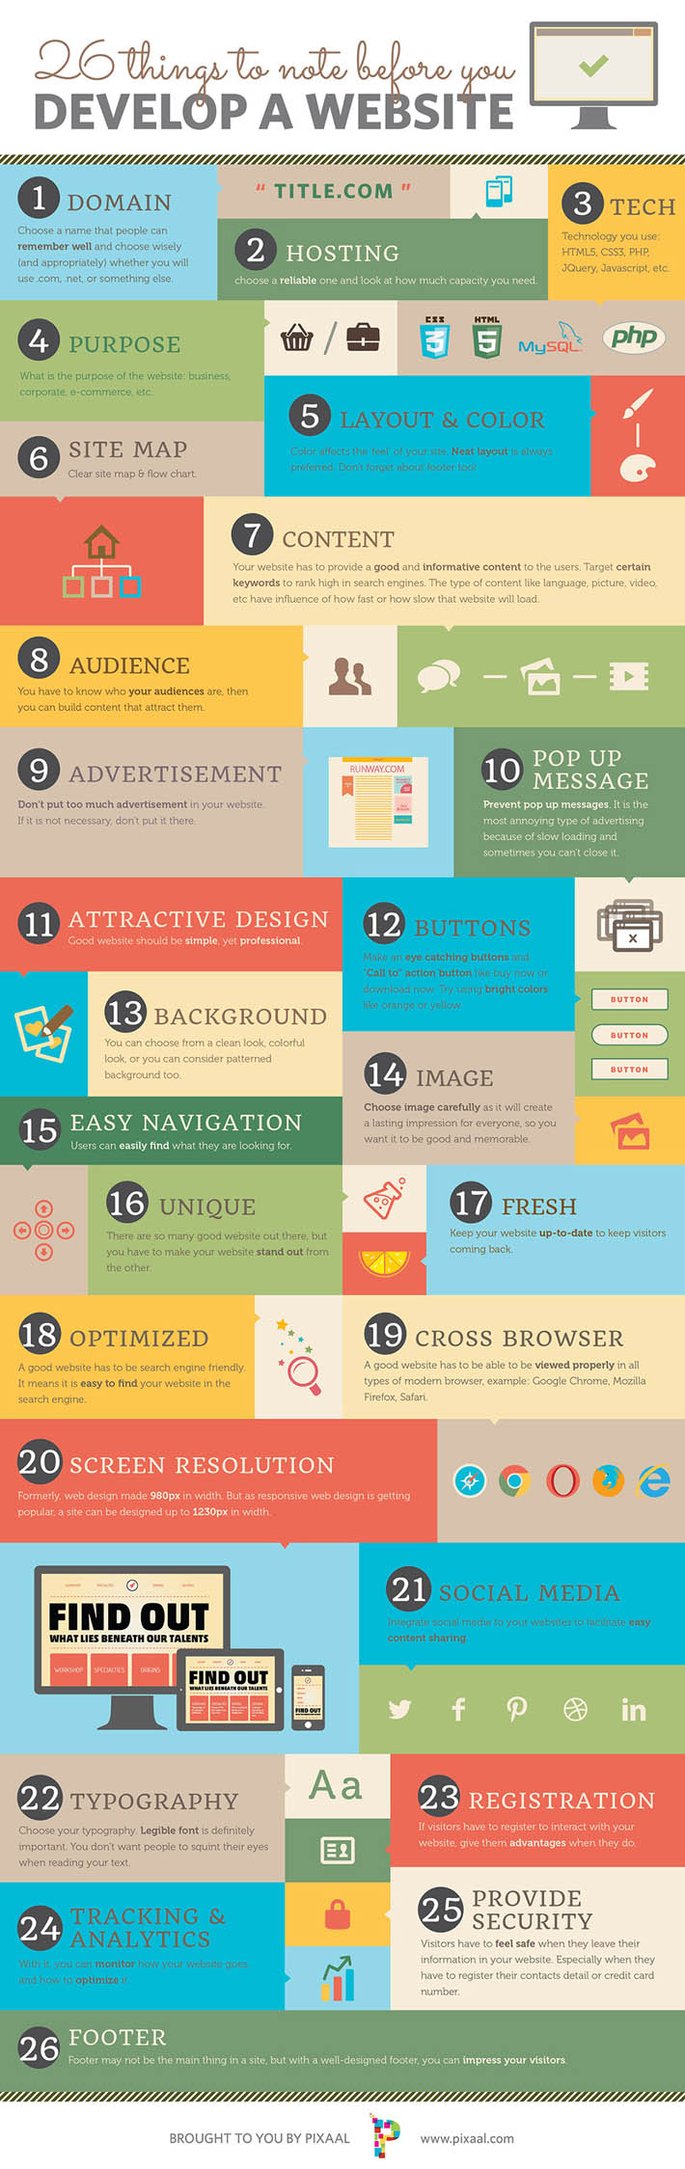 26-things-to-note-before-you-develop-a-website